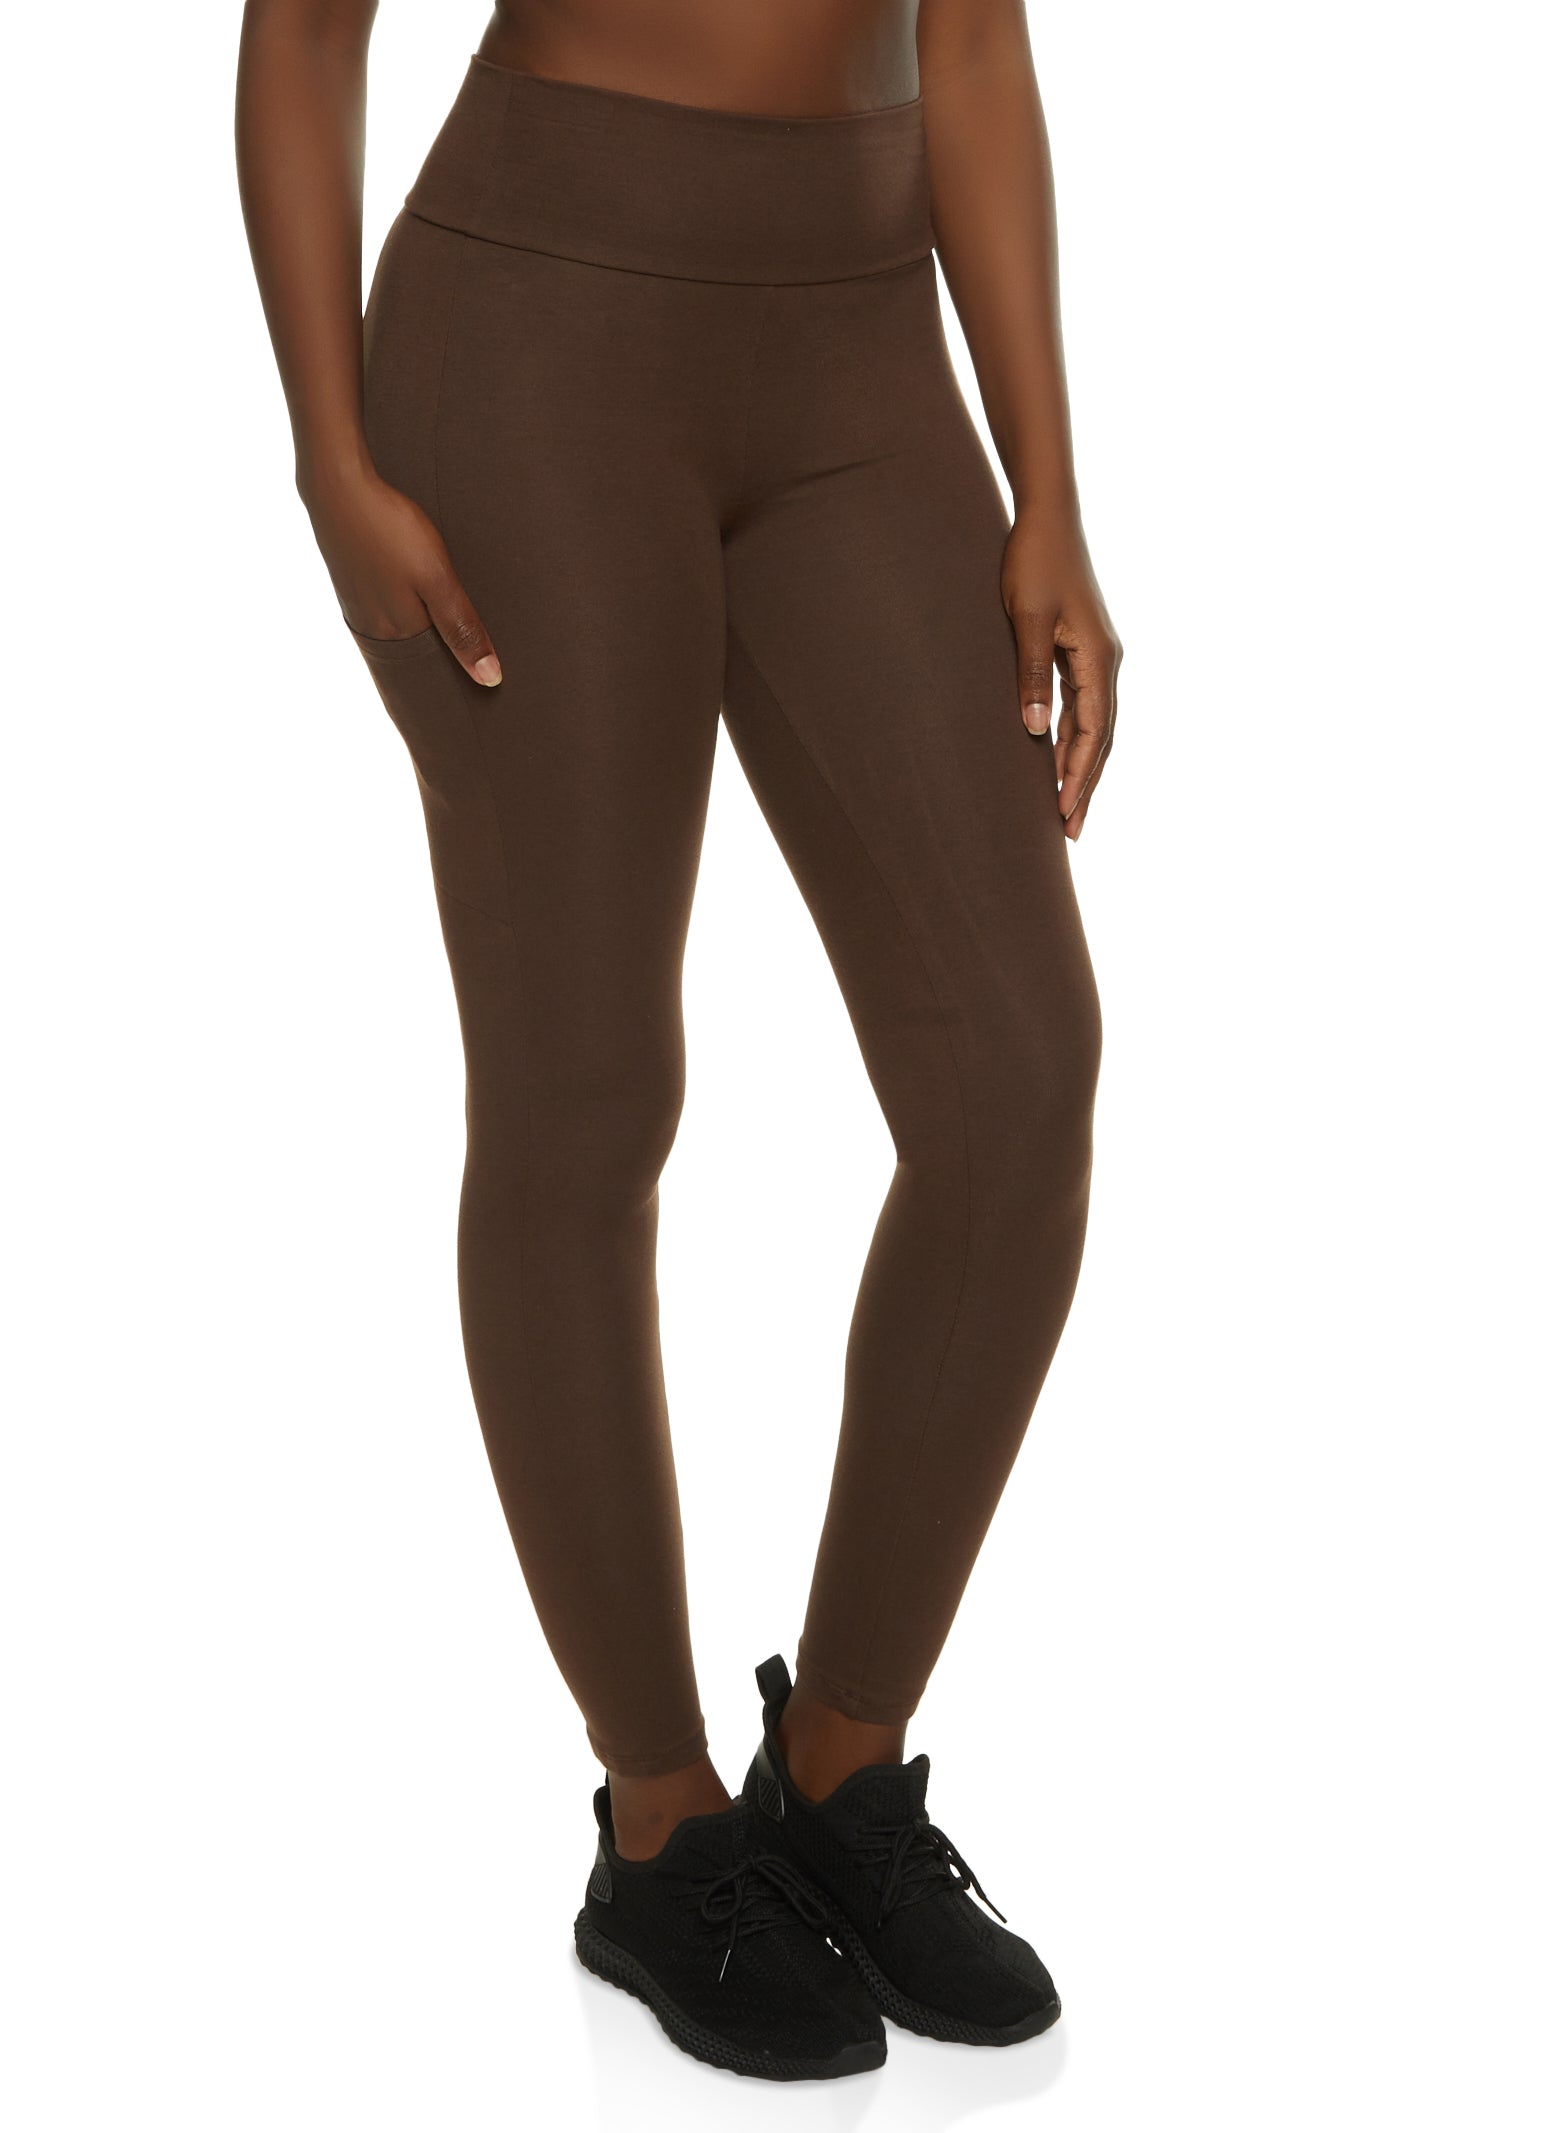 Buy SPIFFY Women Footed Length Cotton Spendex Legging D.Brown at Amazon.in